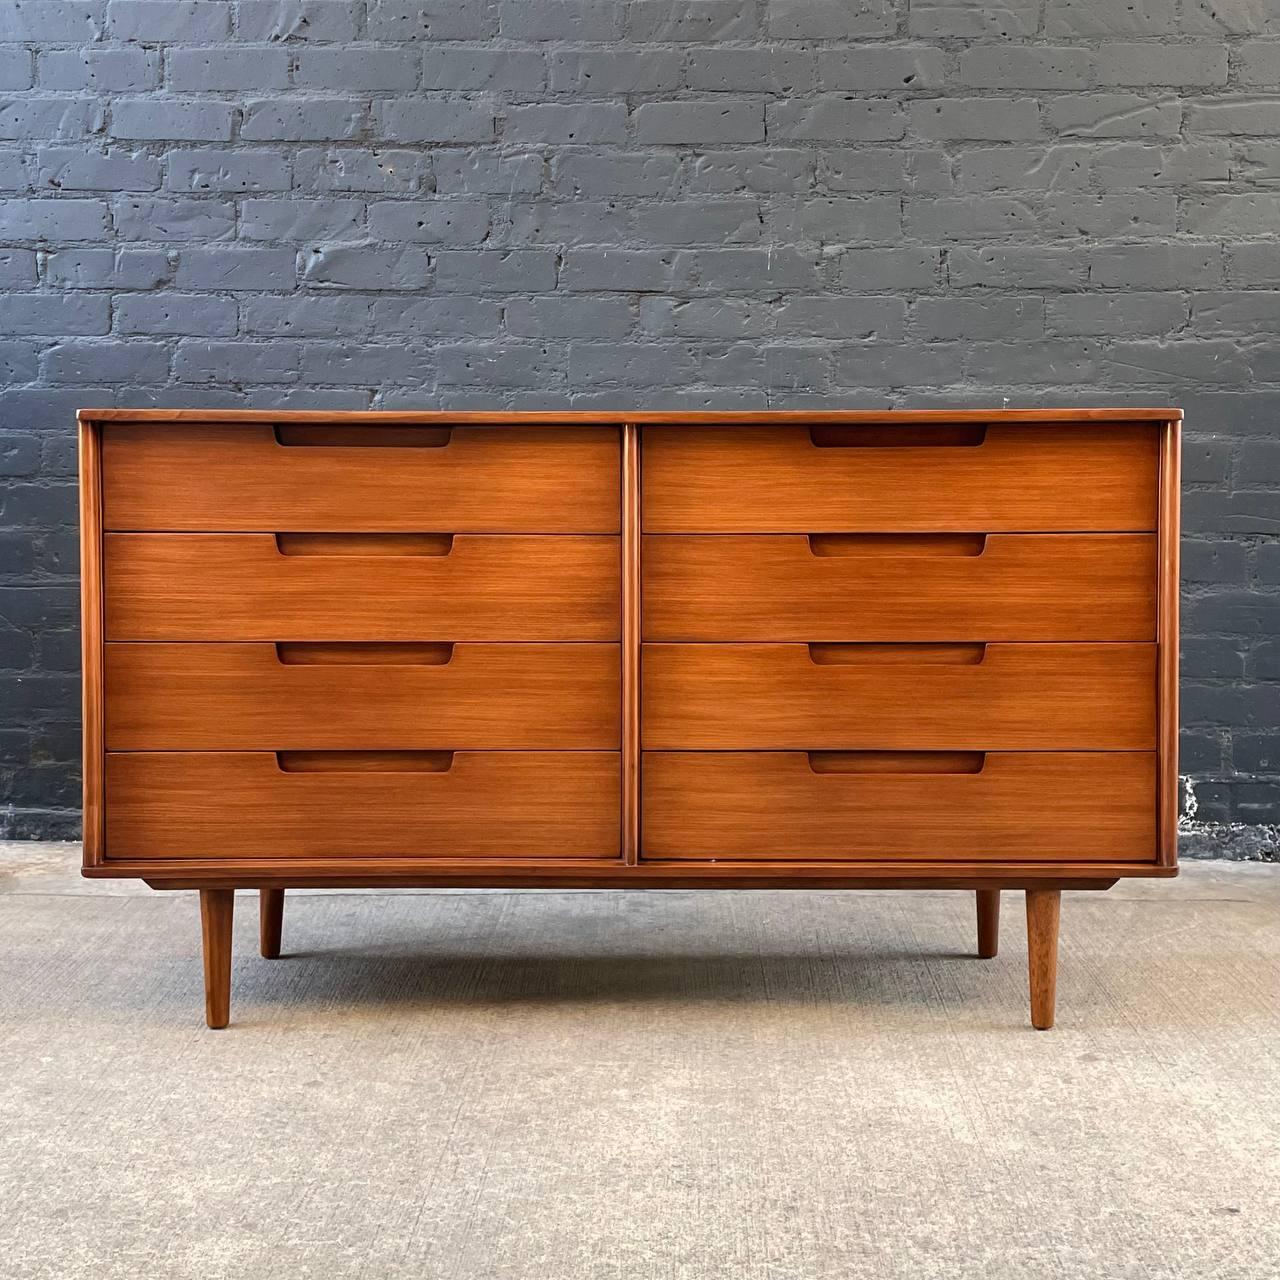 American Newly Refinished - Mid-Century Modern Dresser by Milo Baughman for Drexel